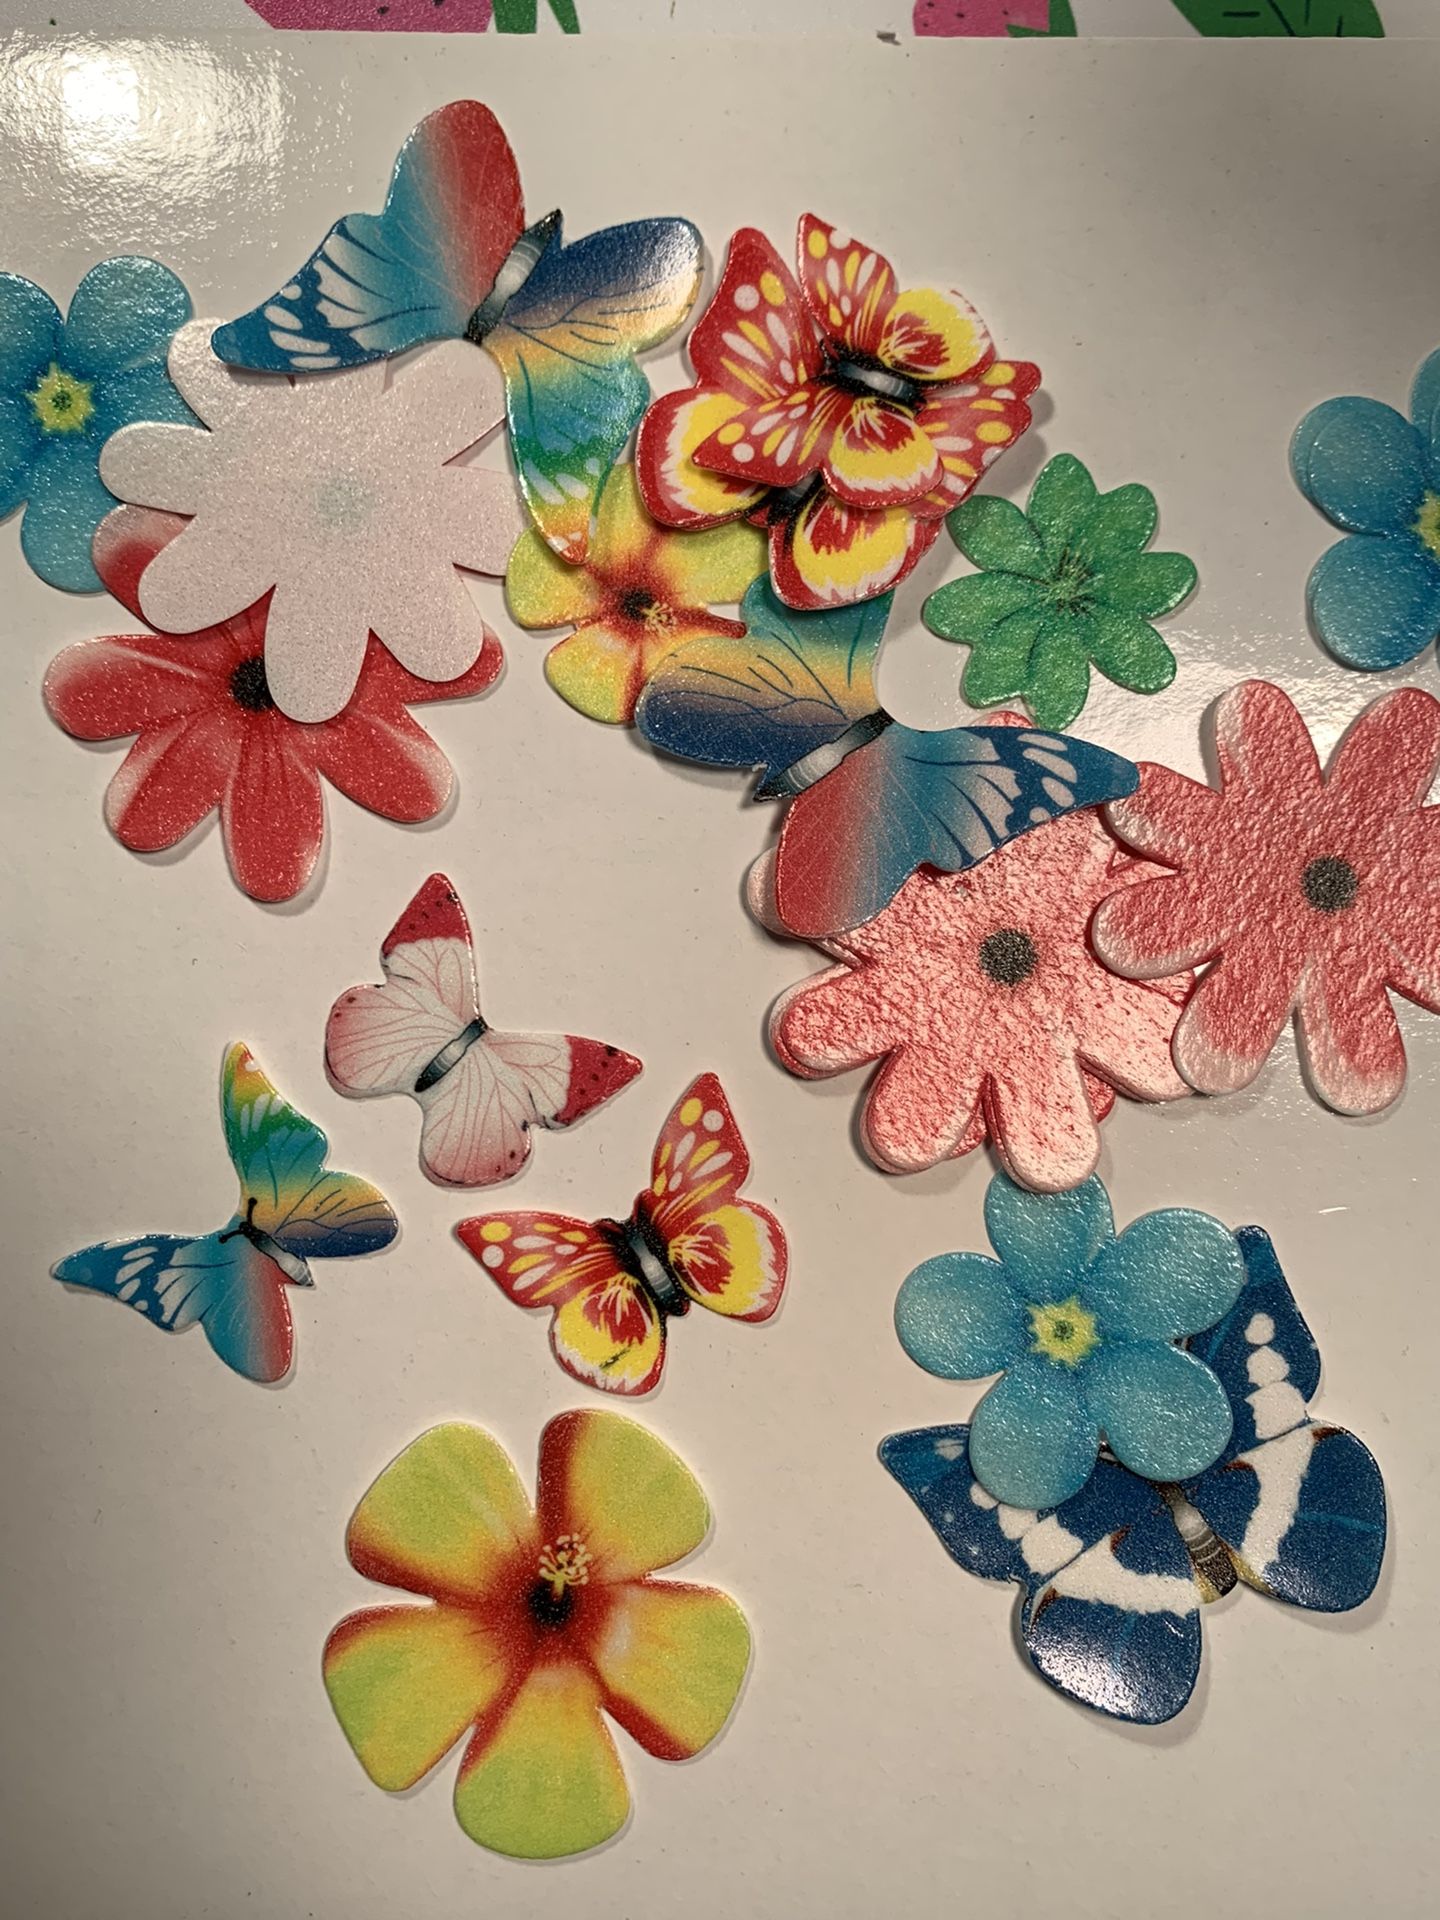 Edible butterflies and flowers